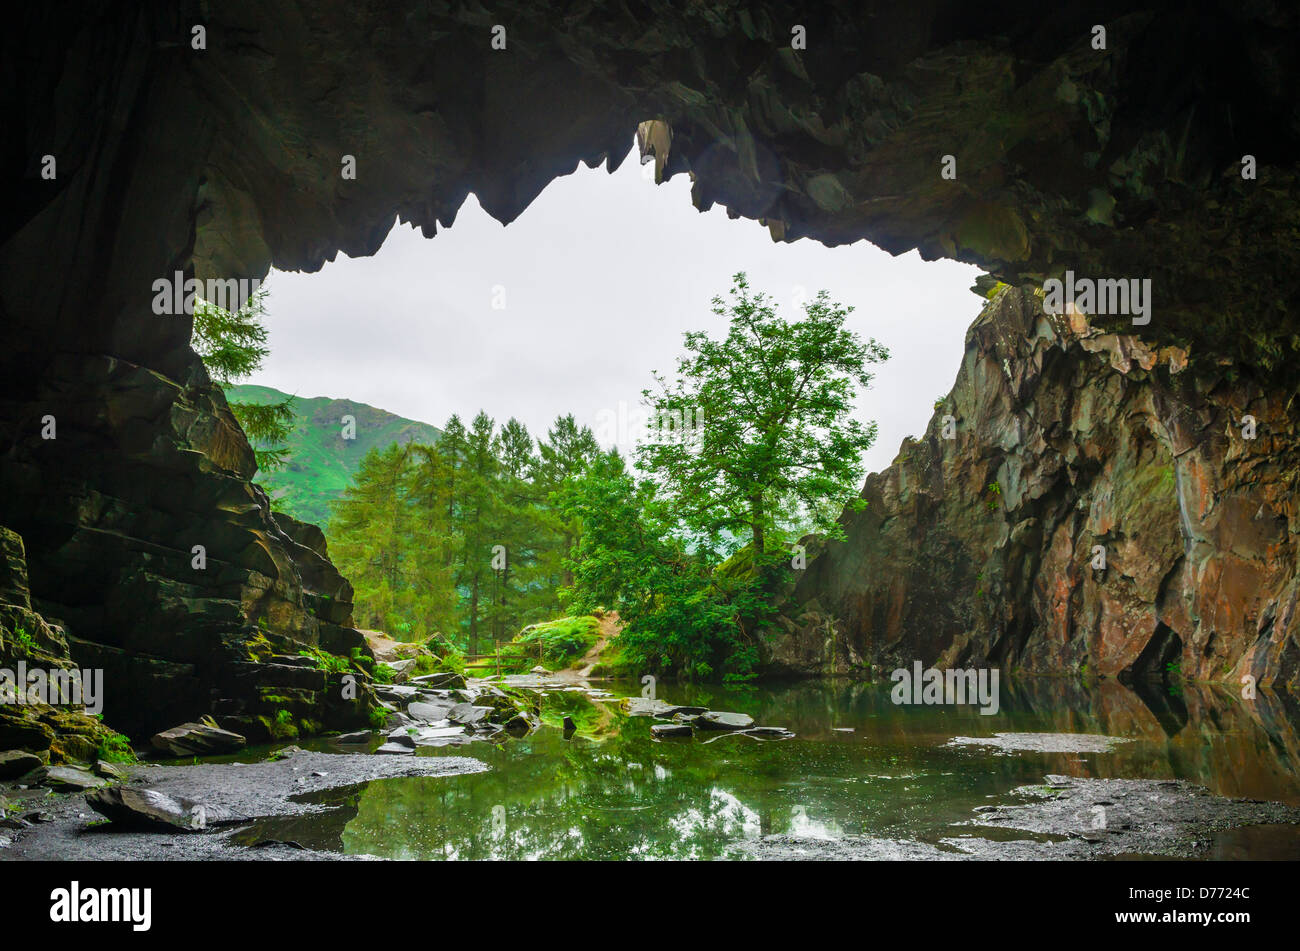 The mouth of an abandoned quarry cave on Loughrigg Fell in the Lake District, Cumbria, England. Stock Photo